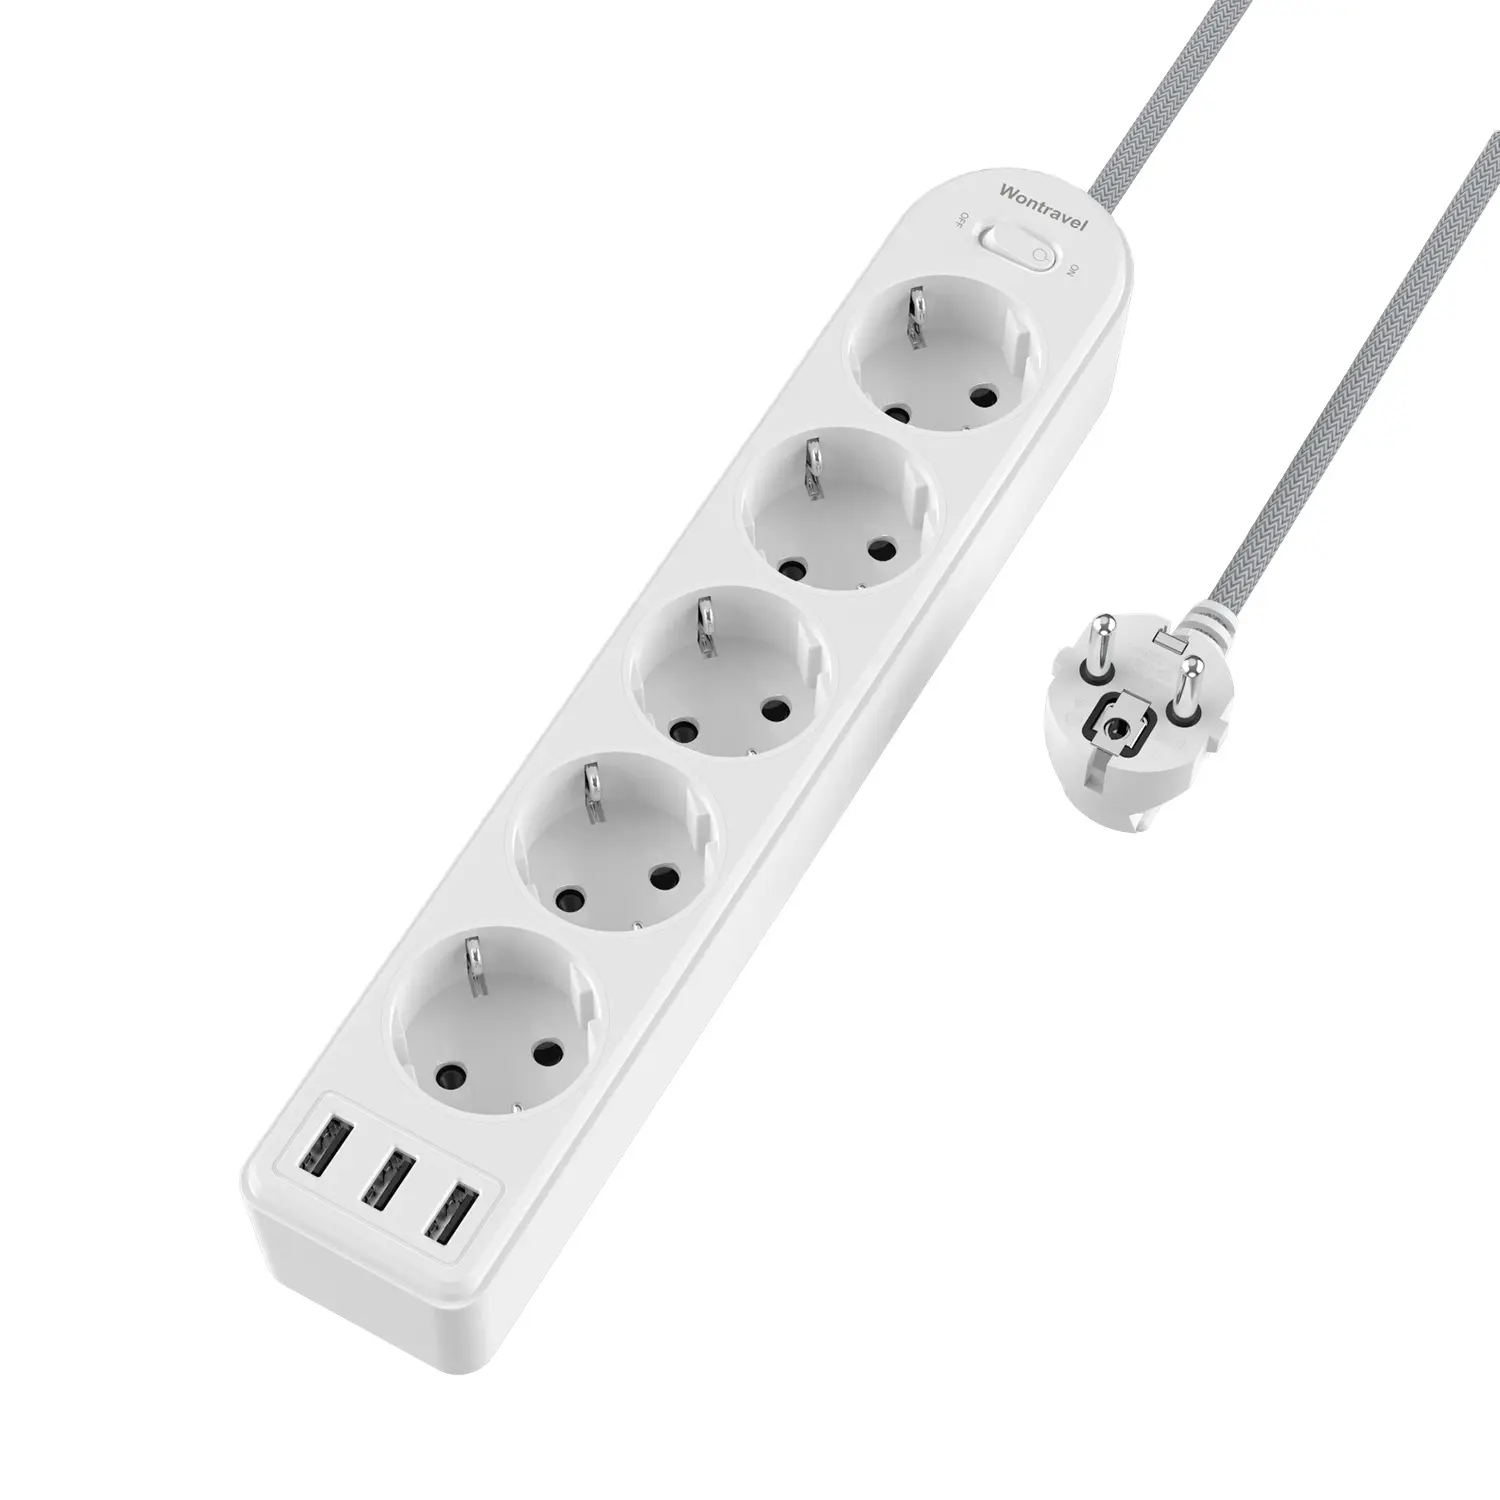 Wontravel CE Listed Hot Sale in EU 5 way EU Power Strip high power extension power strip with USB